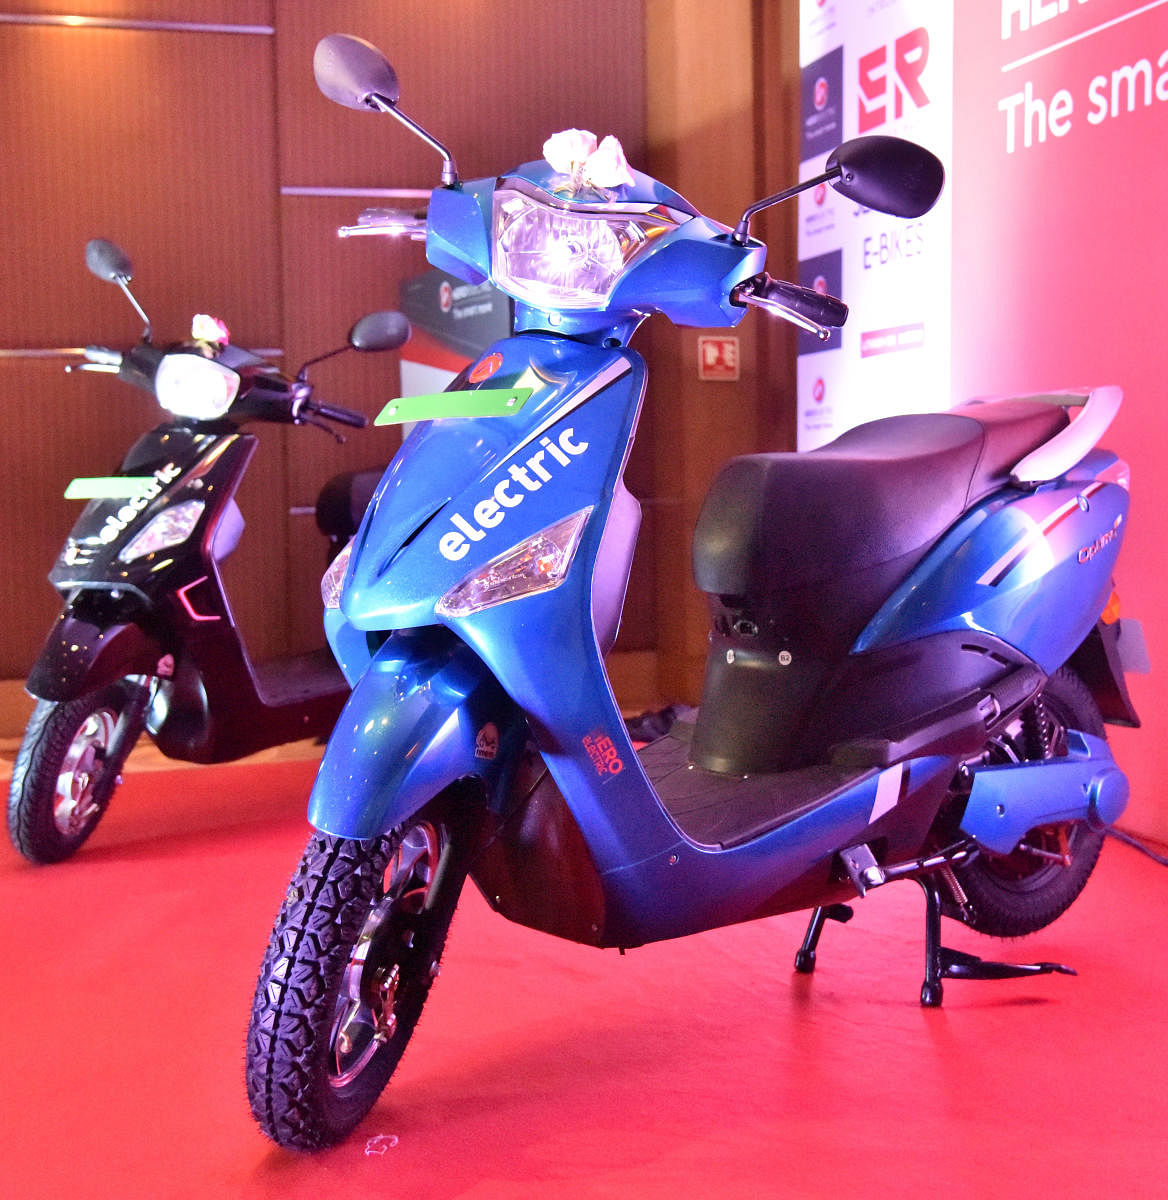 Hero electric scooters. (Image used for representation)